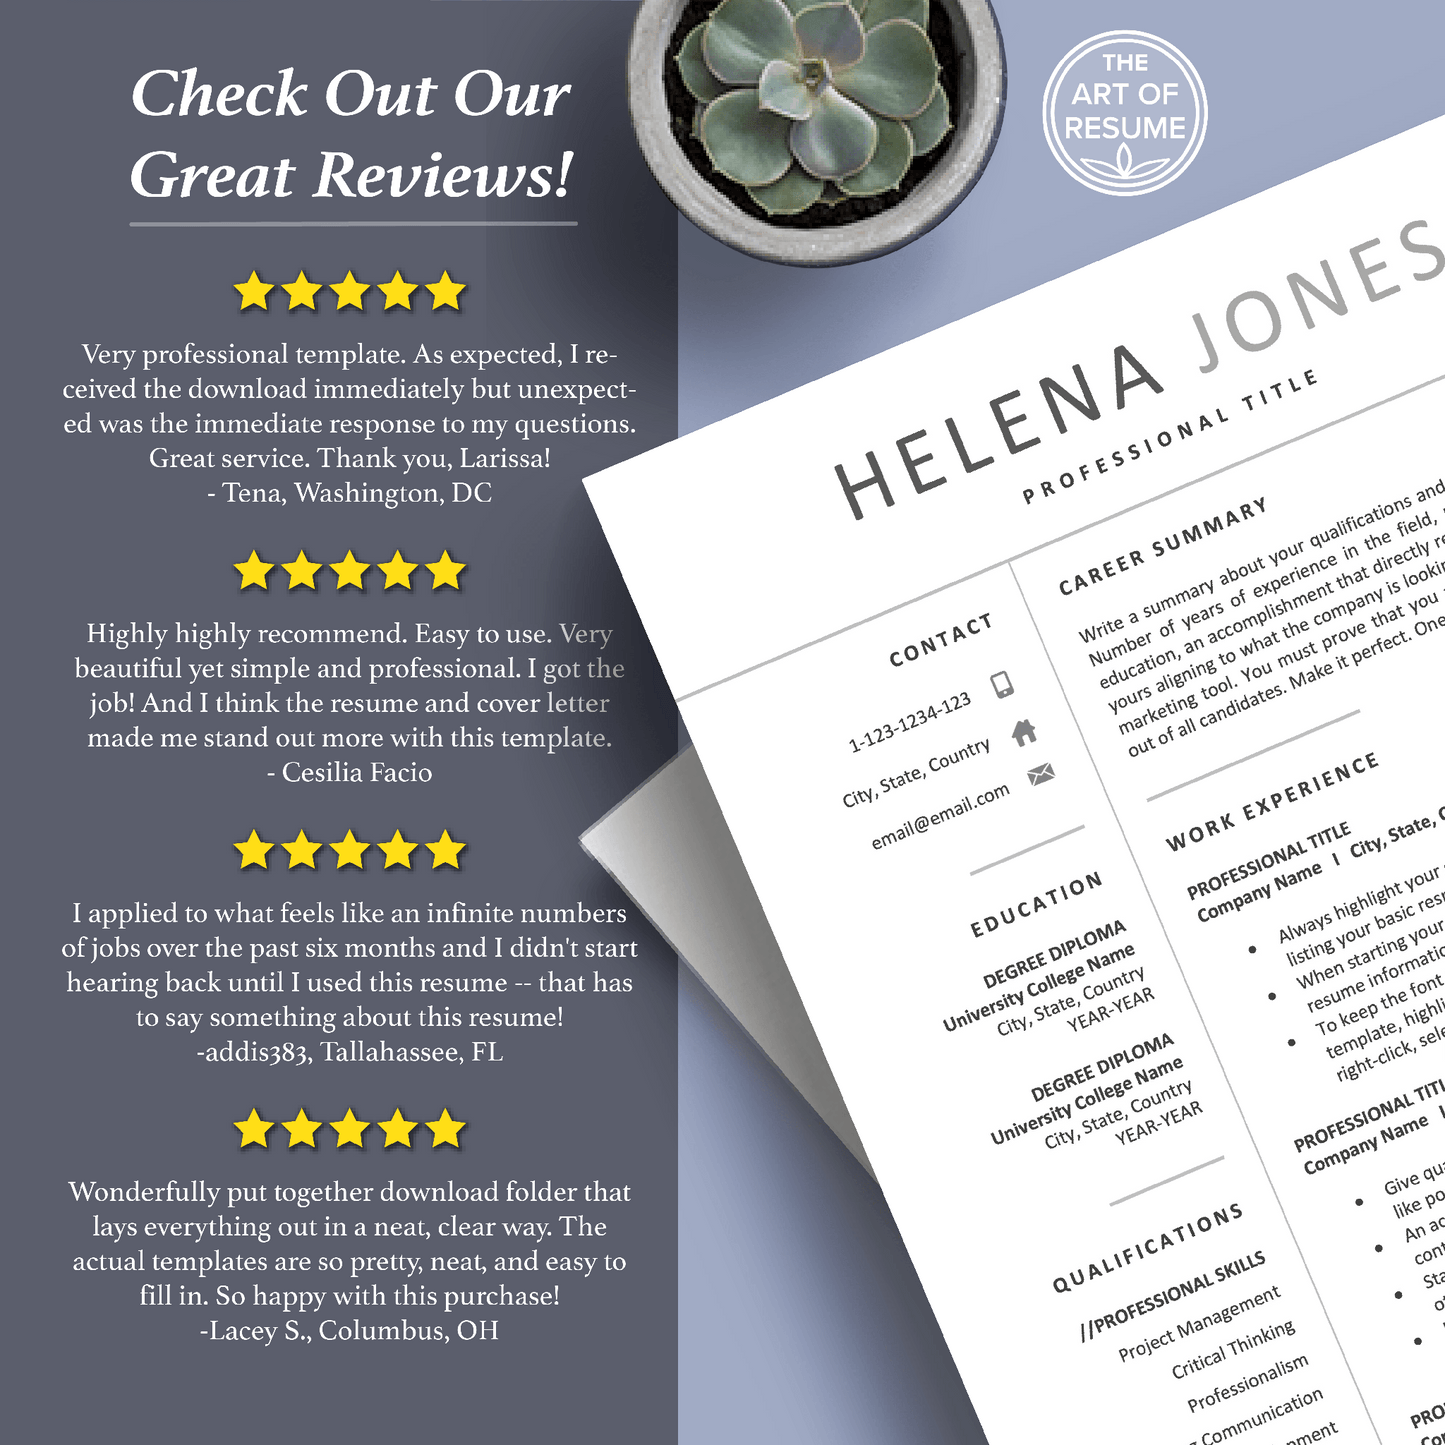 The Art of Resume Templates | Professional Simple Resume CV Templates Online 5-Star Reviews